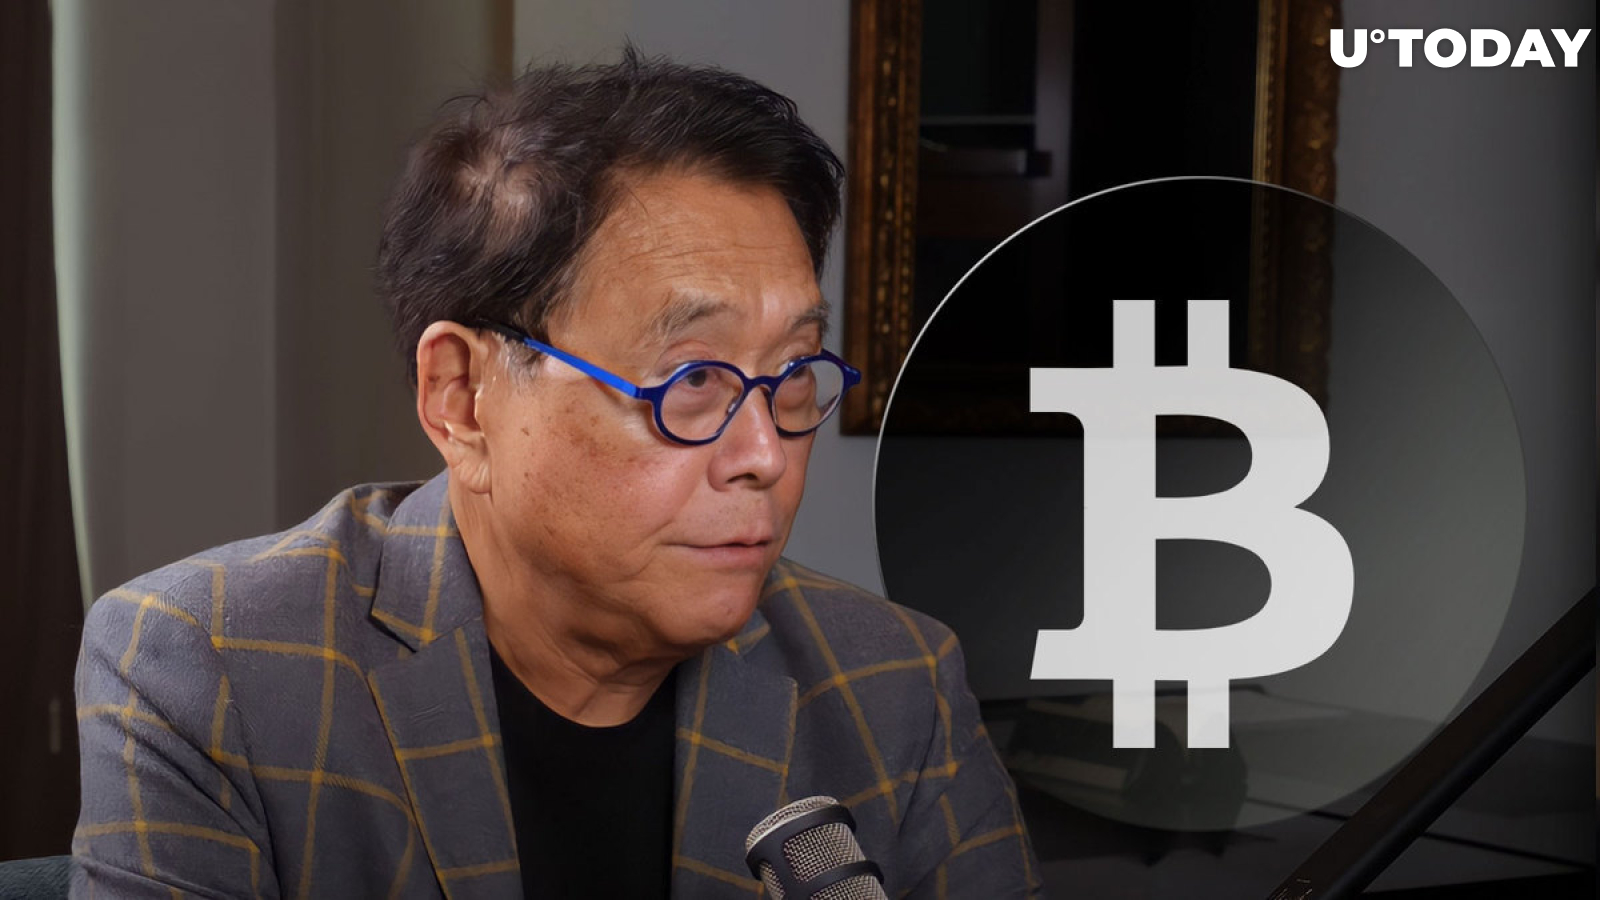 Now Is Good Time to Buy Bitcoin, 'Rich Dad Poor Dad' Author Says, 'Shop Til You Drop'